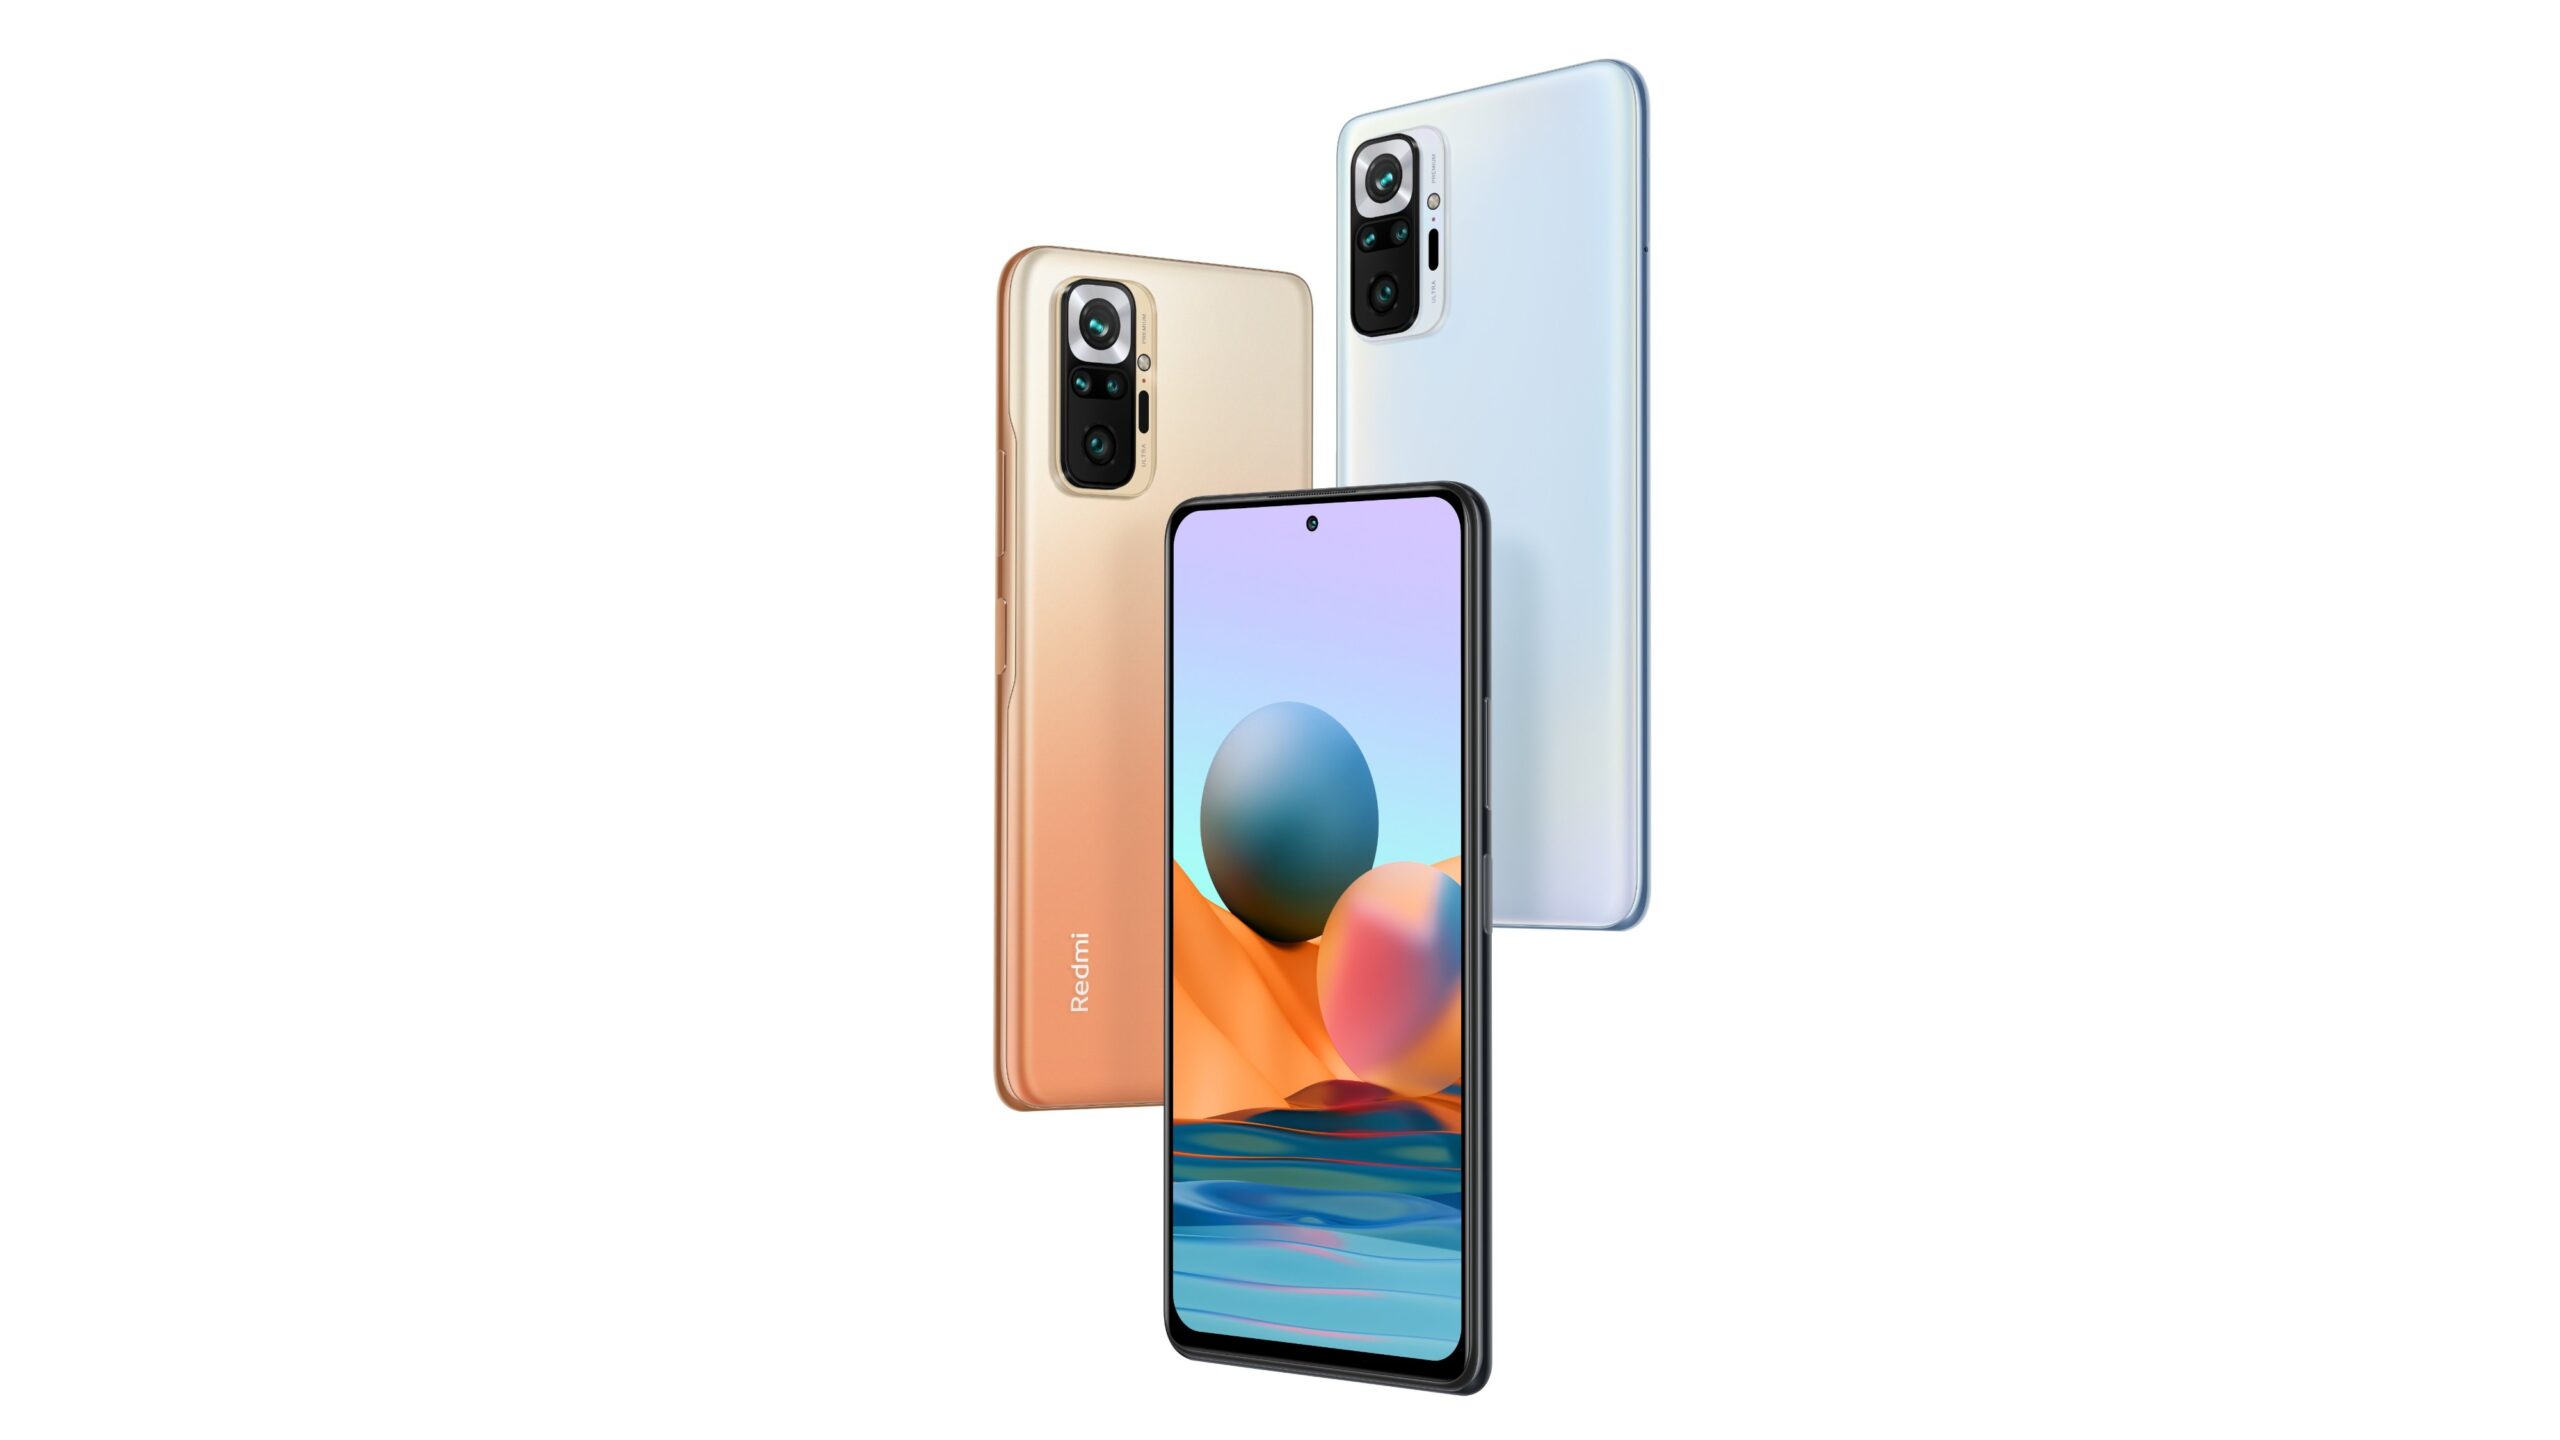 Redmi Note 10 and Redmi Note 10 Pro launched in South Korea, Mi TV 4S series tags along